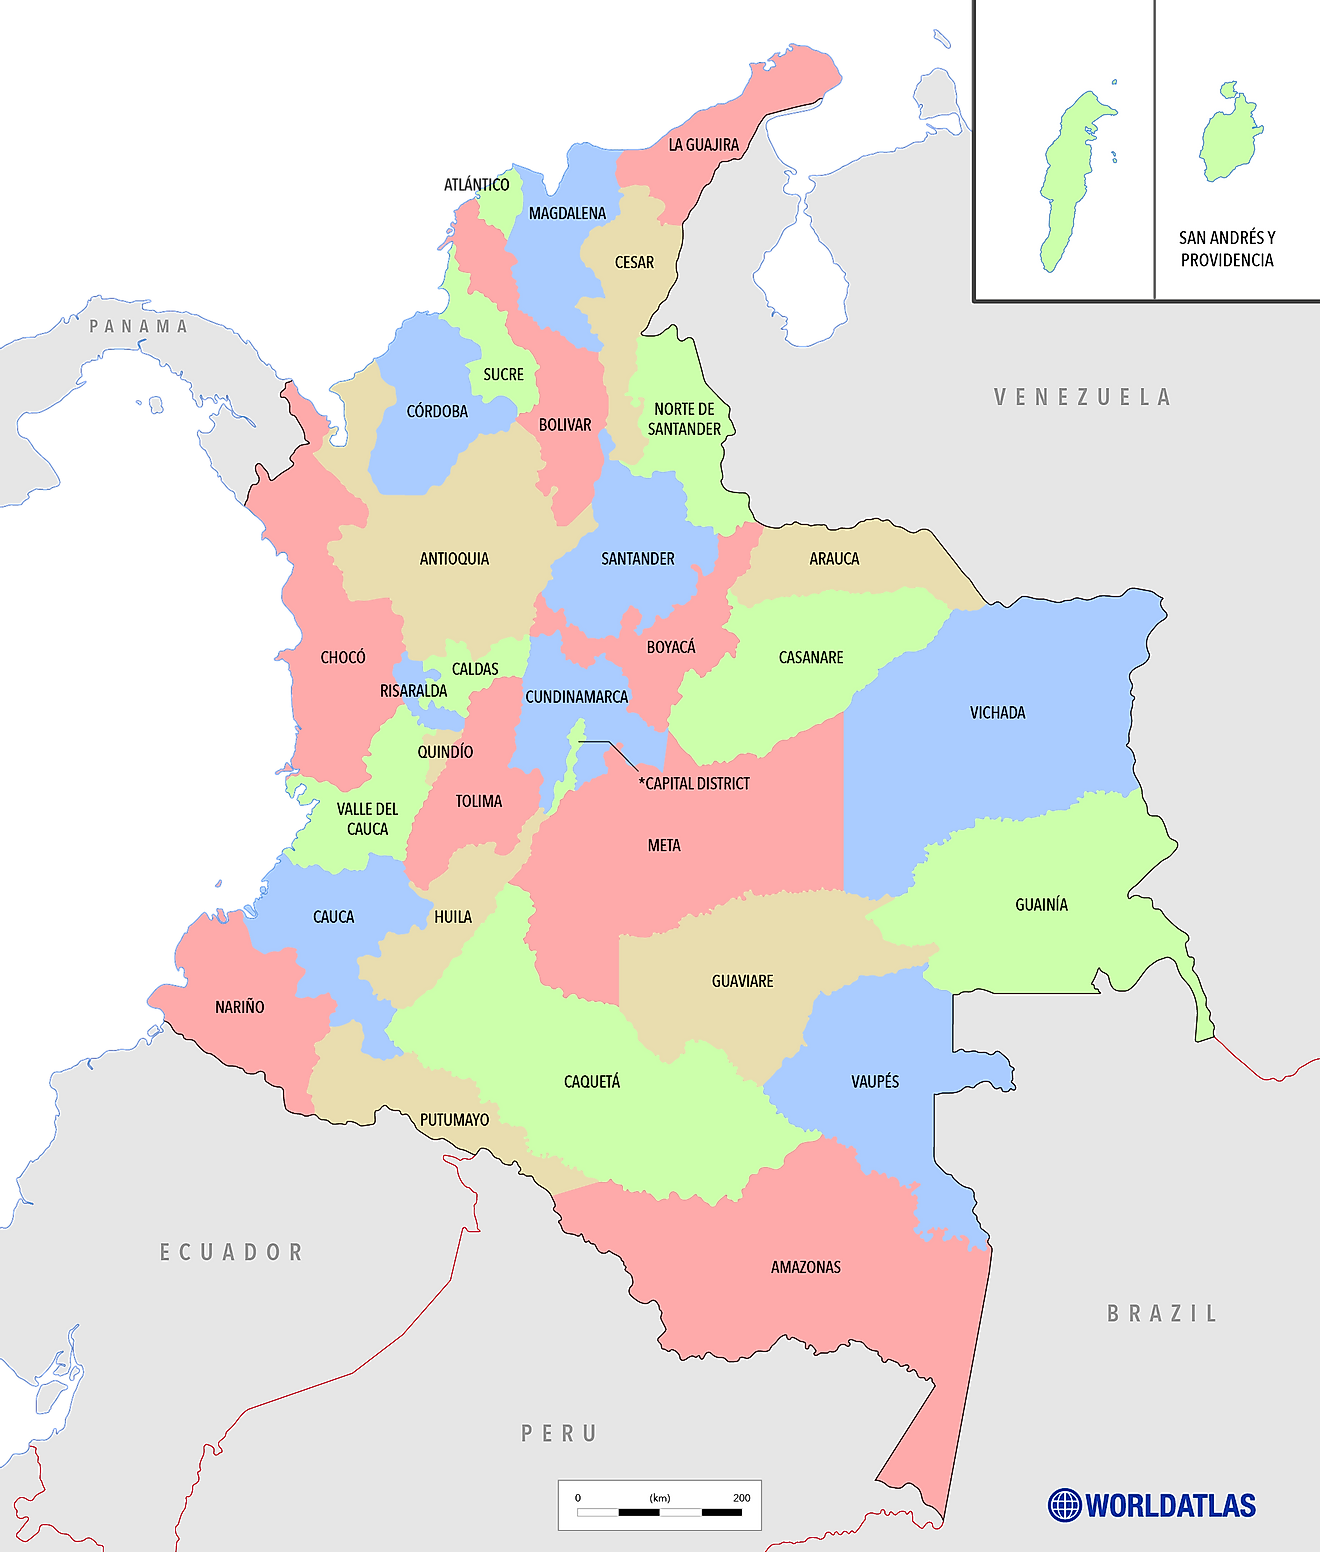 Political Map of Colombia showing its 32 departments and the capital district - Bogota